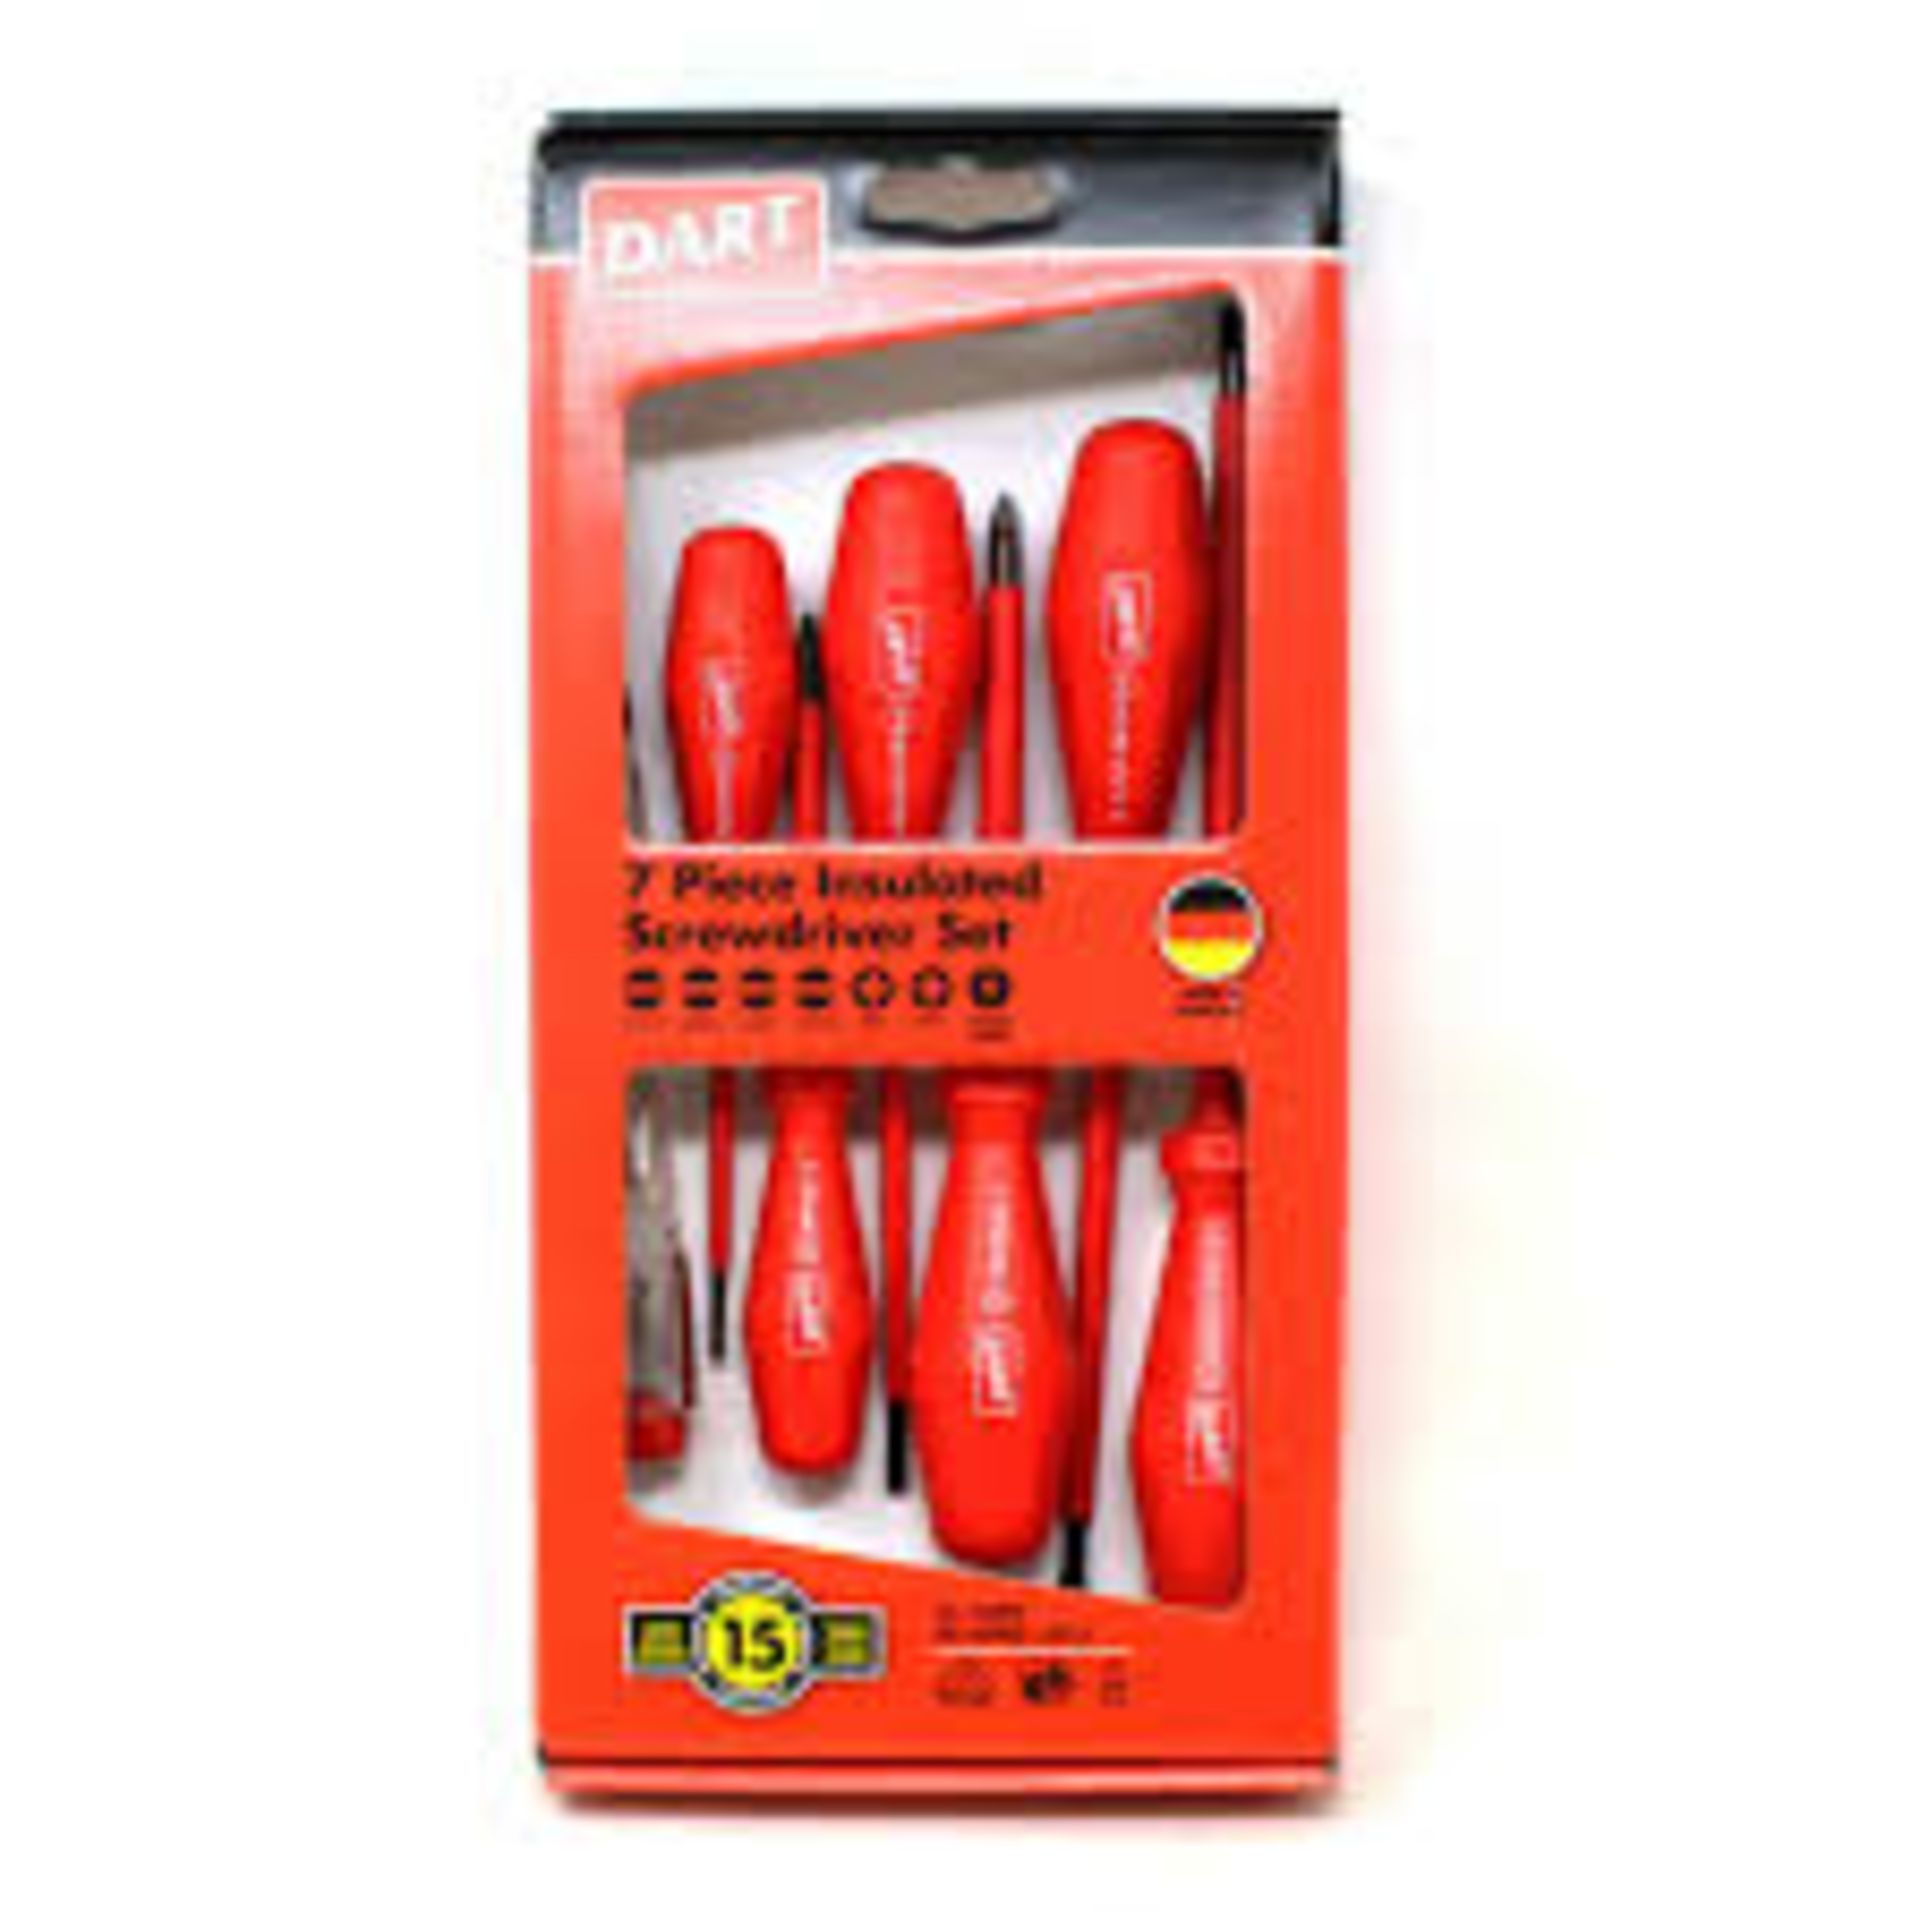 Boxed Brand New 7 Piece Insulated Screwdriver Sets RRP £45 Each (Pictures Are For Illustration